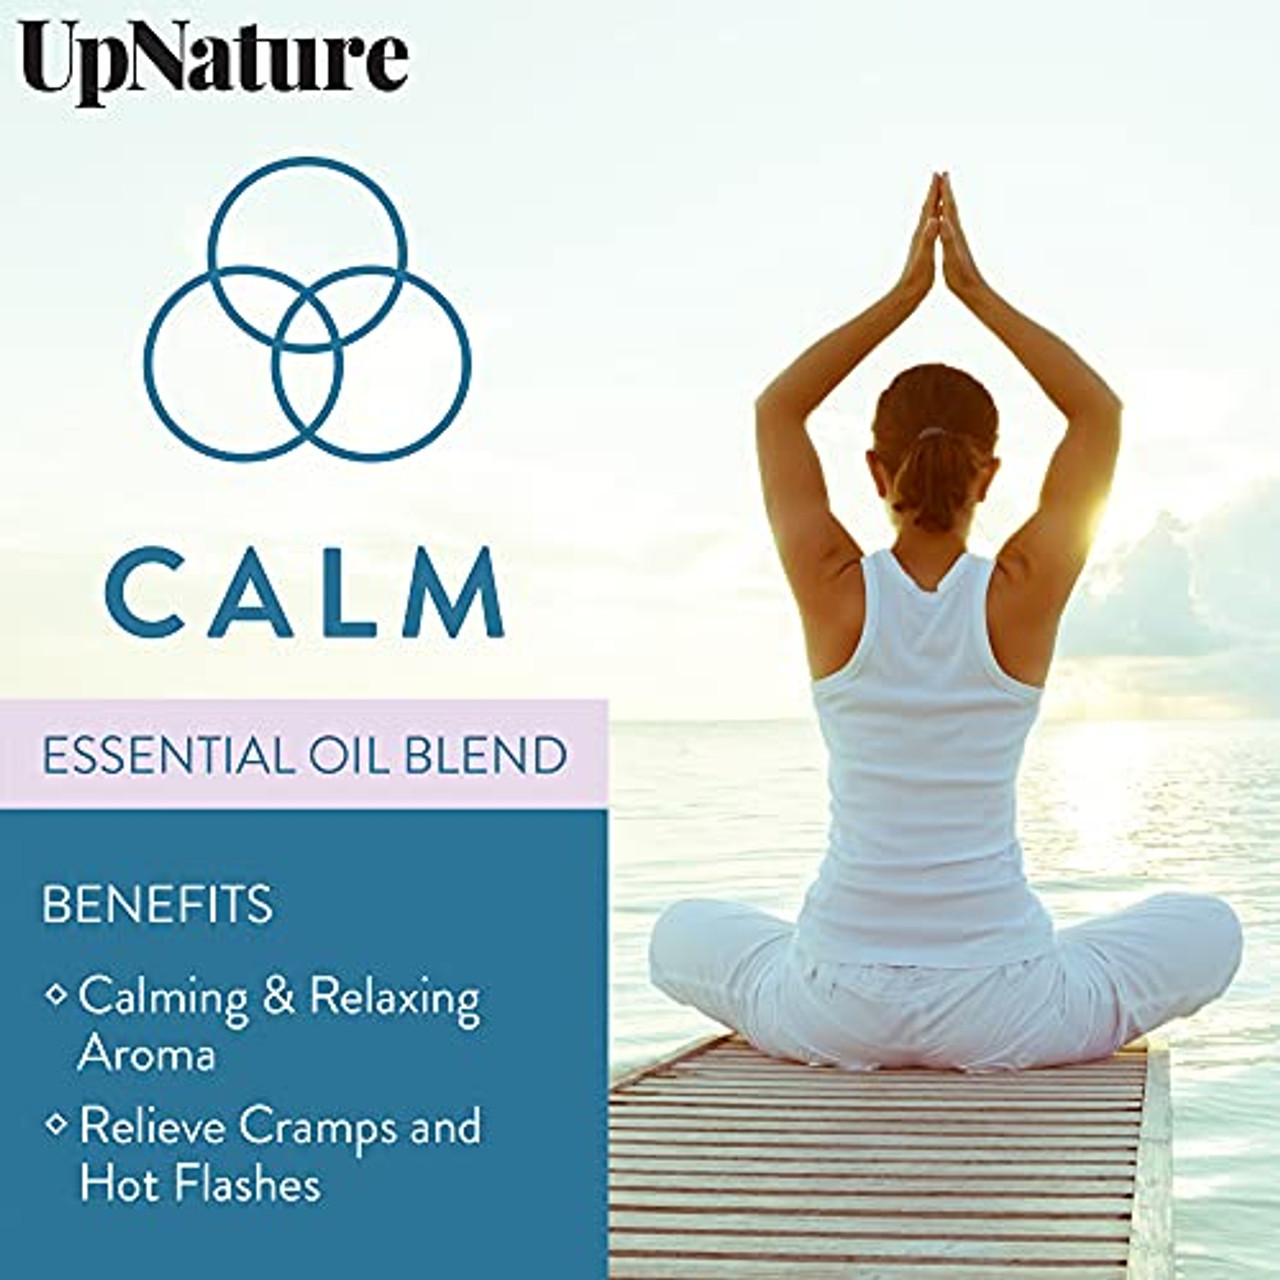 Calm Essential Oil Blend 2 oz - Stress Relief Relaxation Gifts for Women -  Calm Sleep, Destress Aromatherapy